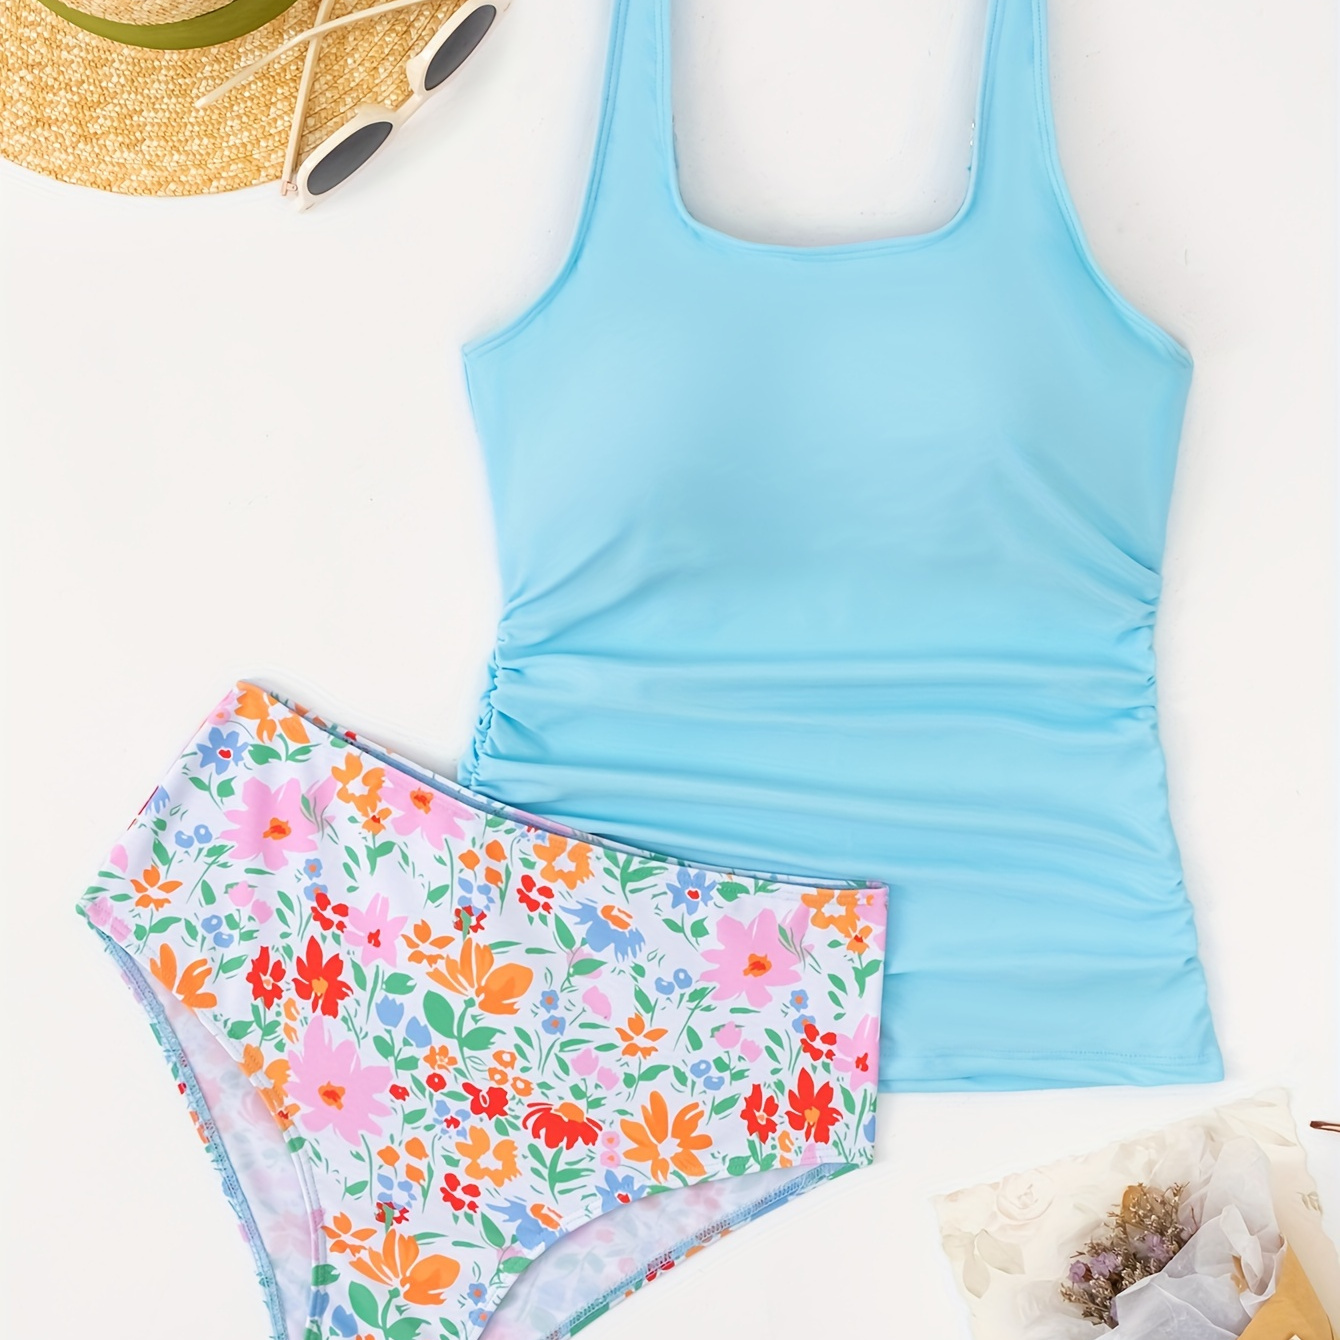 

Plain Blue Tank Top & Ditsy Floral Print Swim Briefs 2 Piece Set Tankini, Ruched High Waisted Stretchy Swimsuits, Women's Swimwear & Clothing